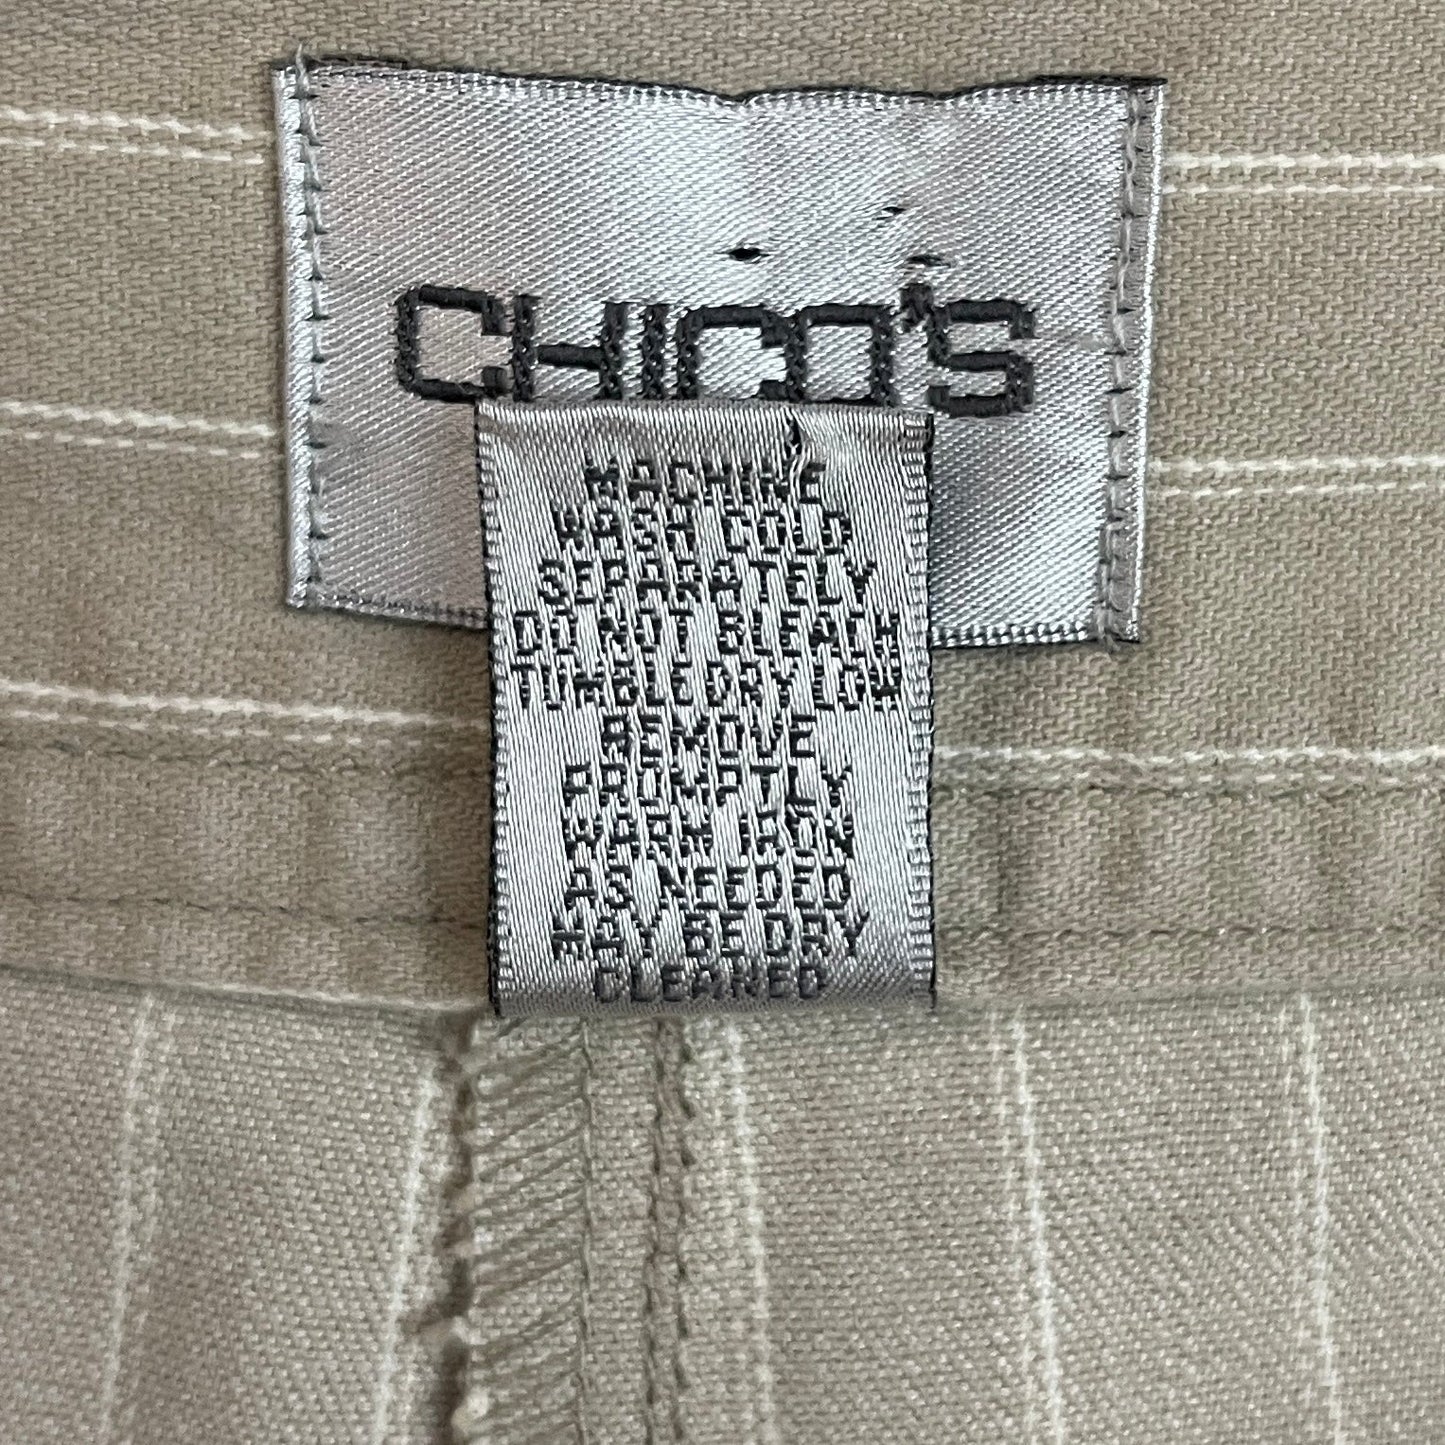 Pants Corduroy By Chicos  Size: 18